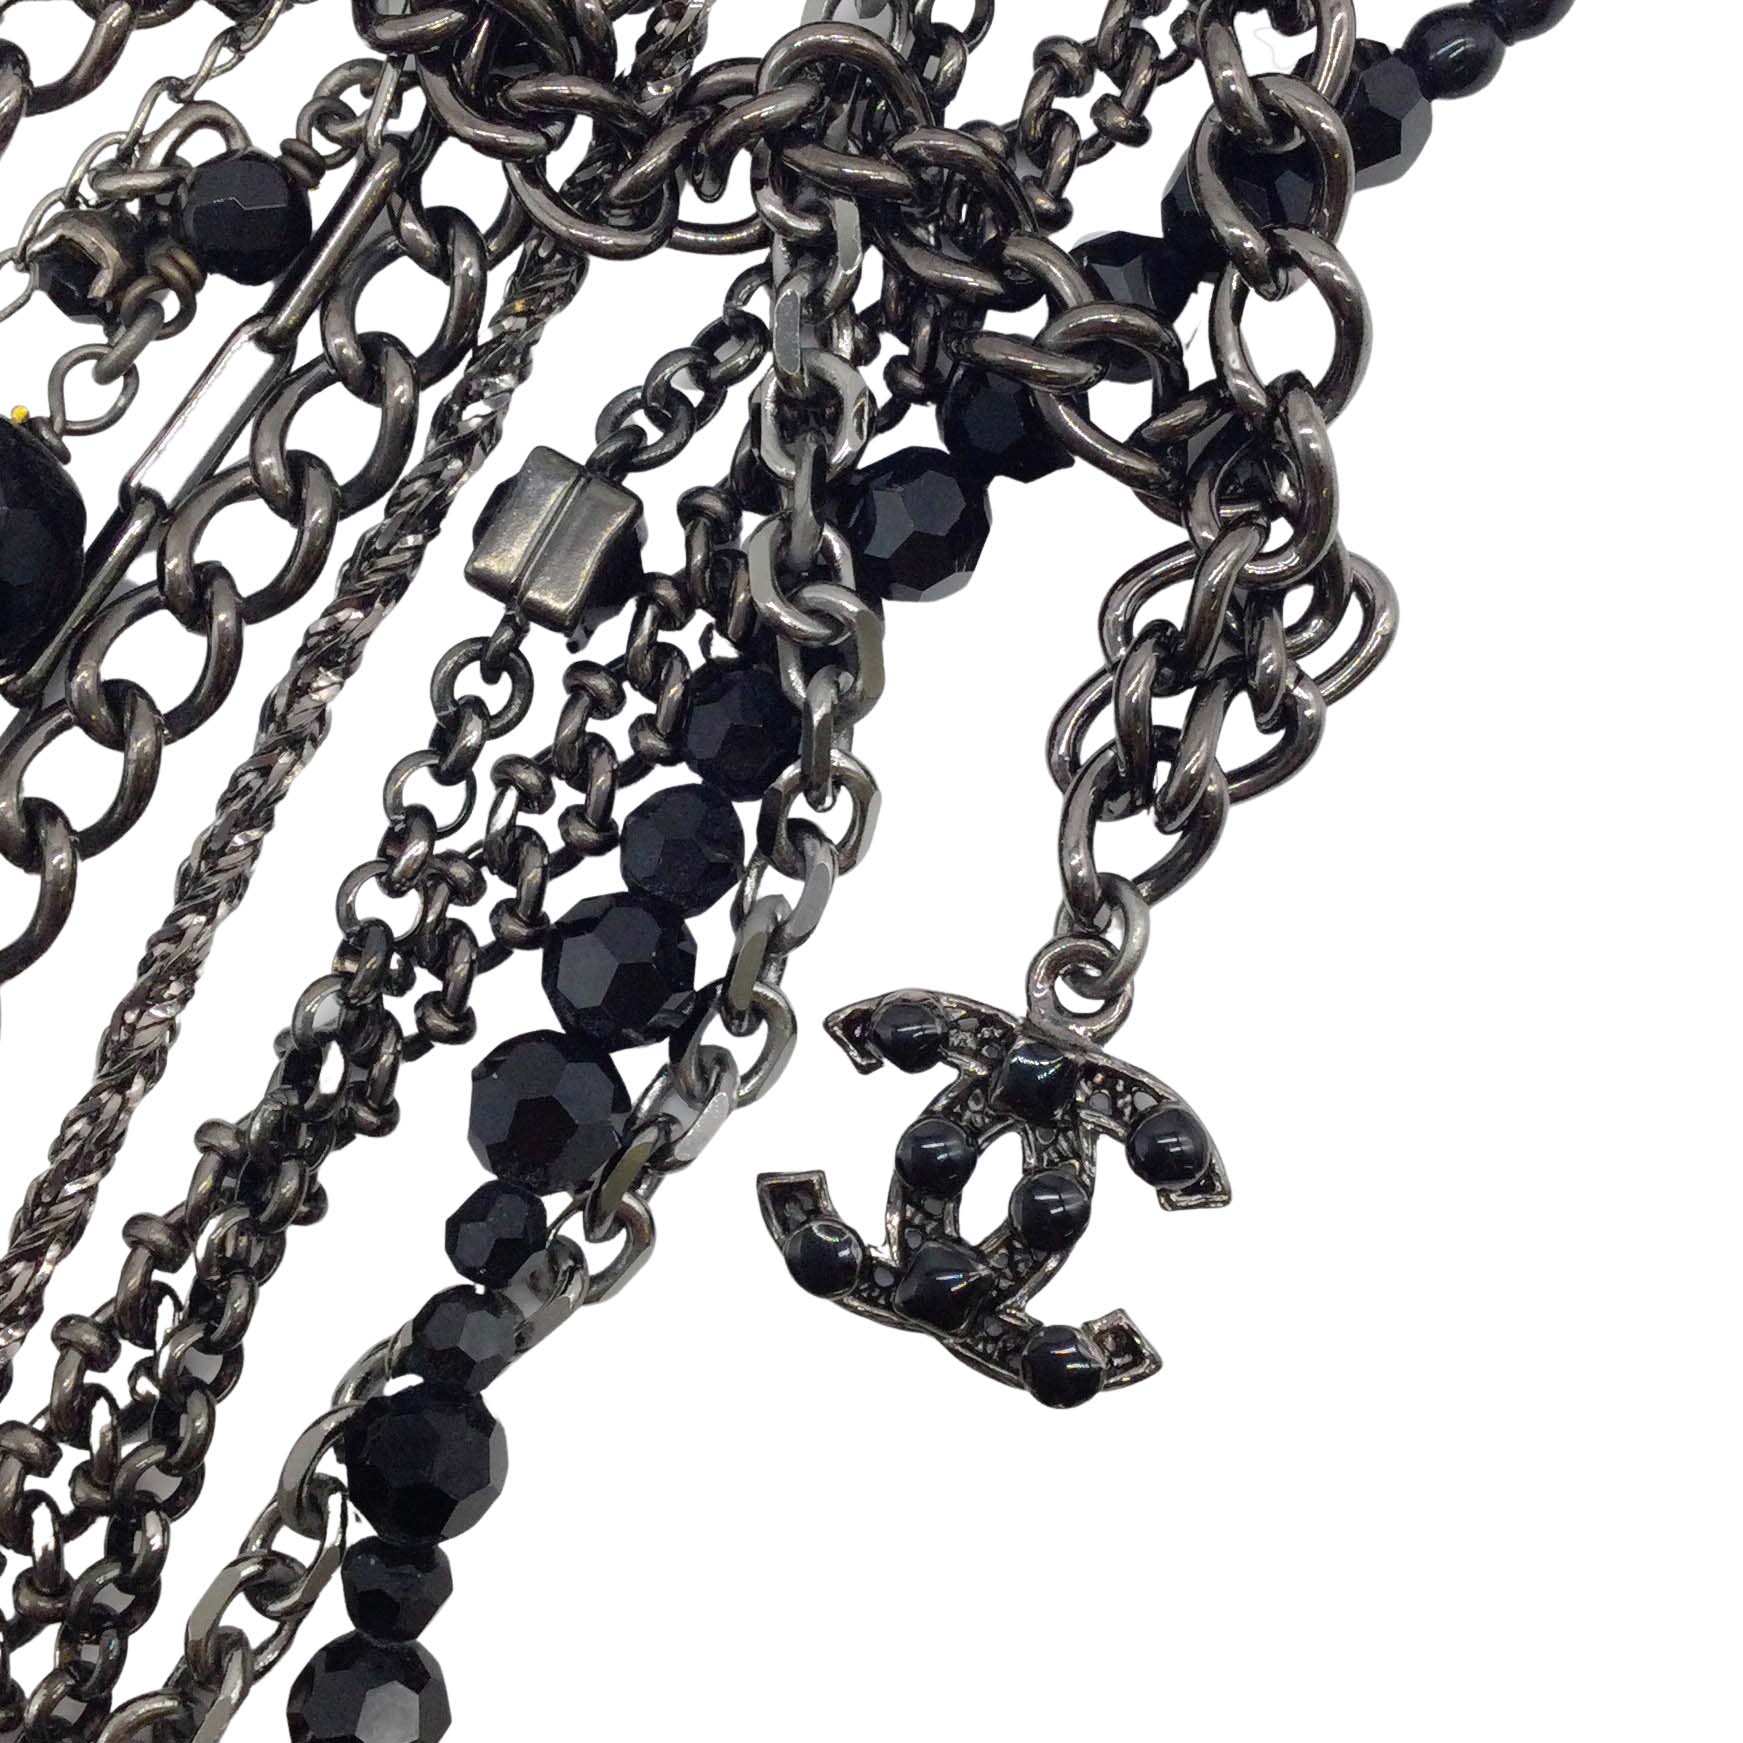 Chanel Black Multi Chain/Beaded Strand Necklace